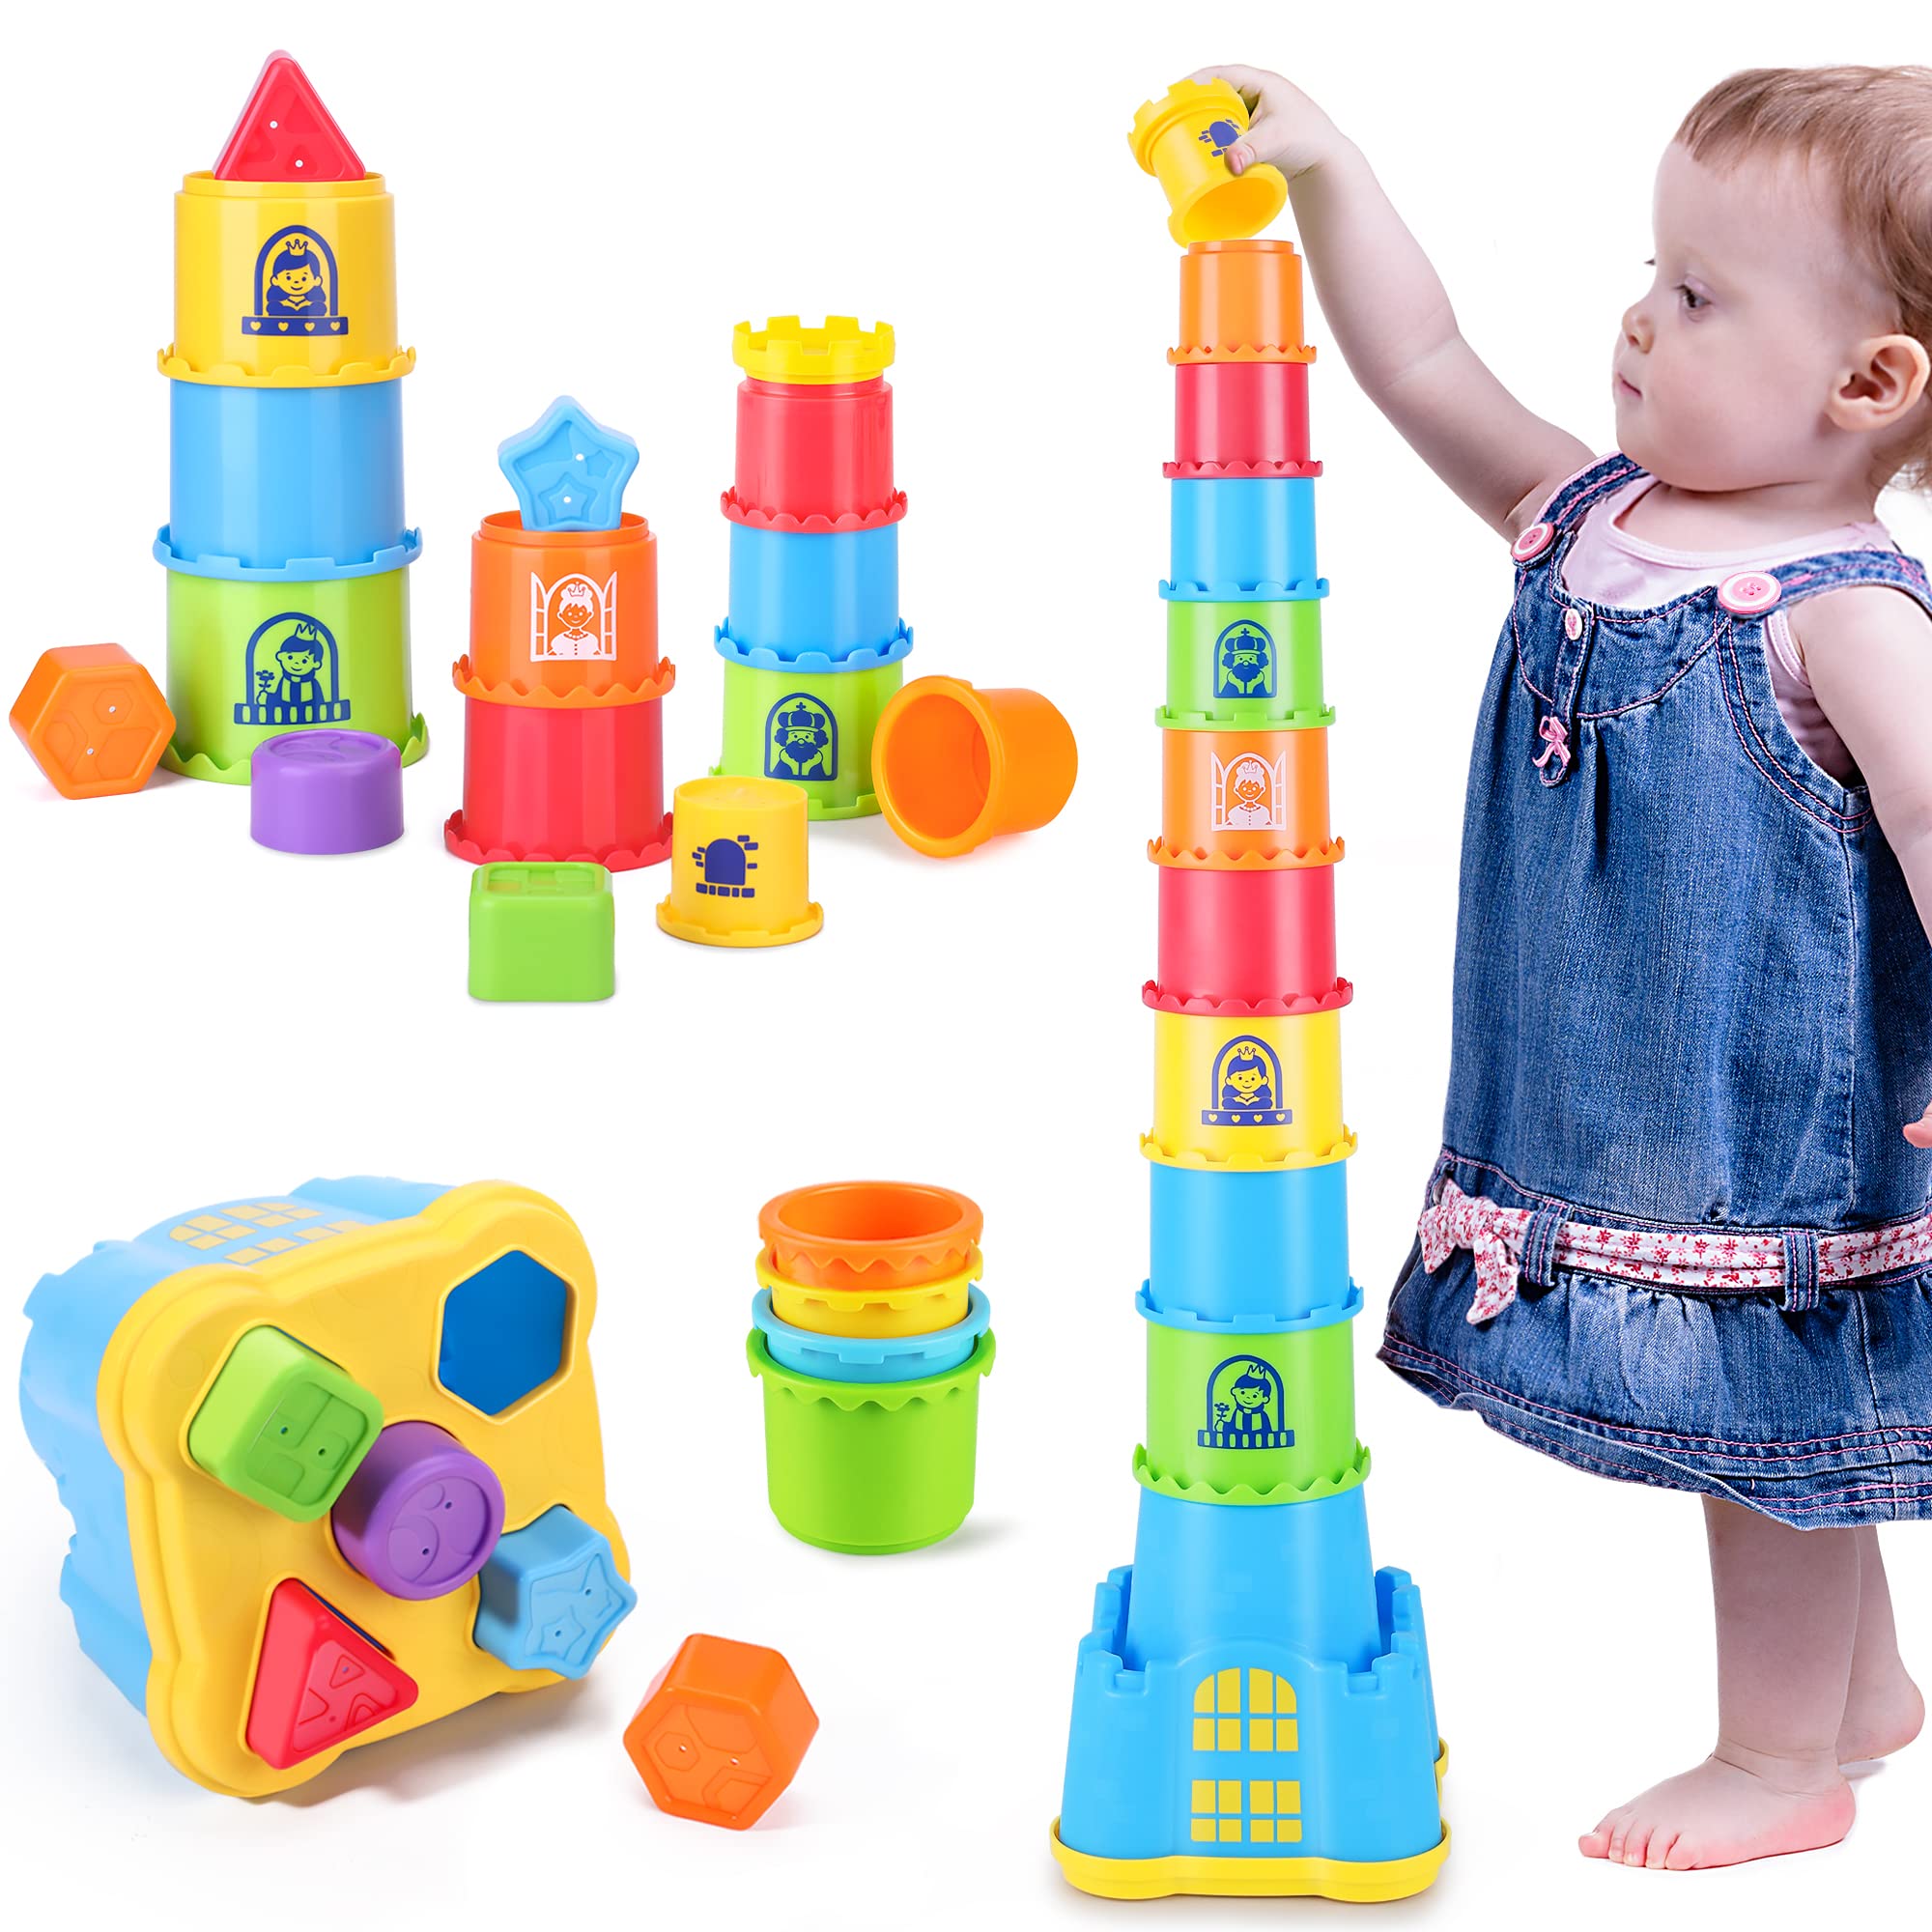 Hand Eye Coordination Toys for Toddlers 1-3: Top Picks for Developing Motor Skills